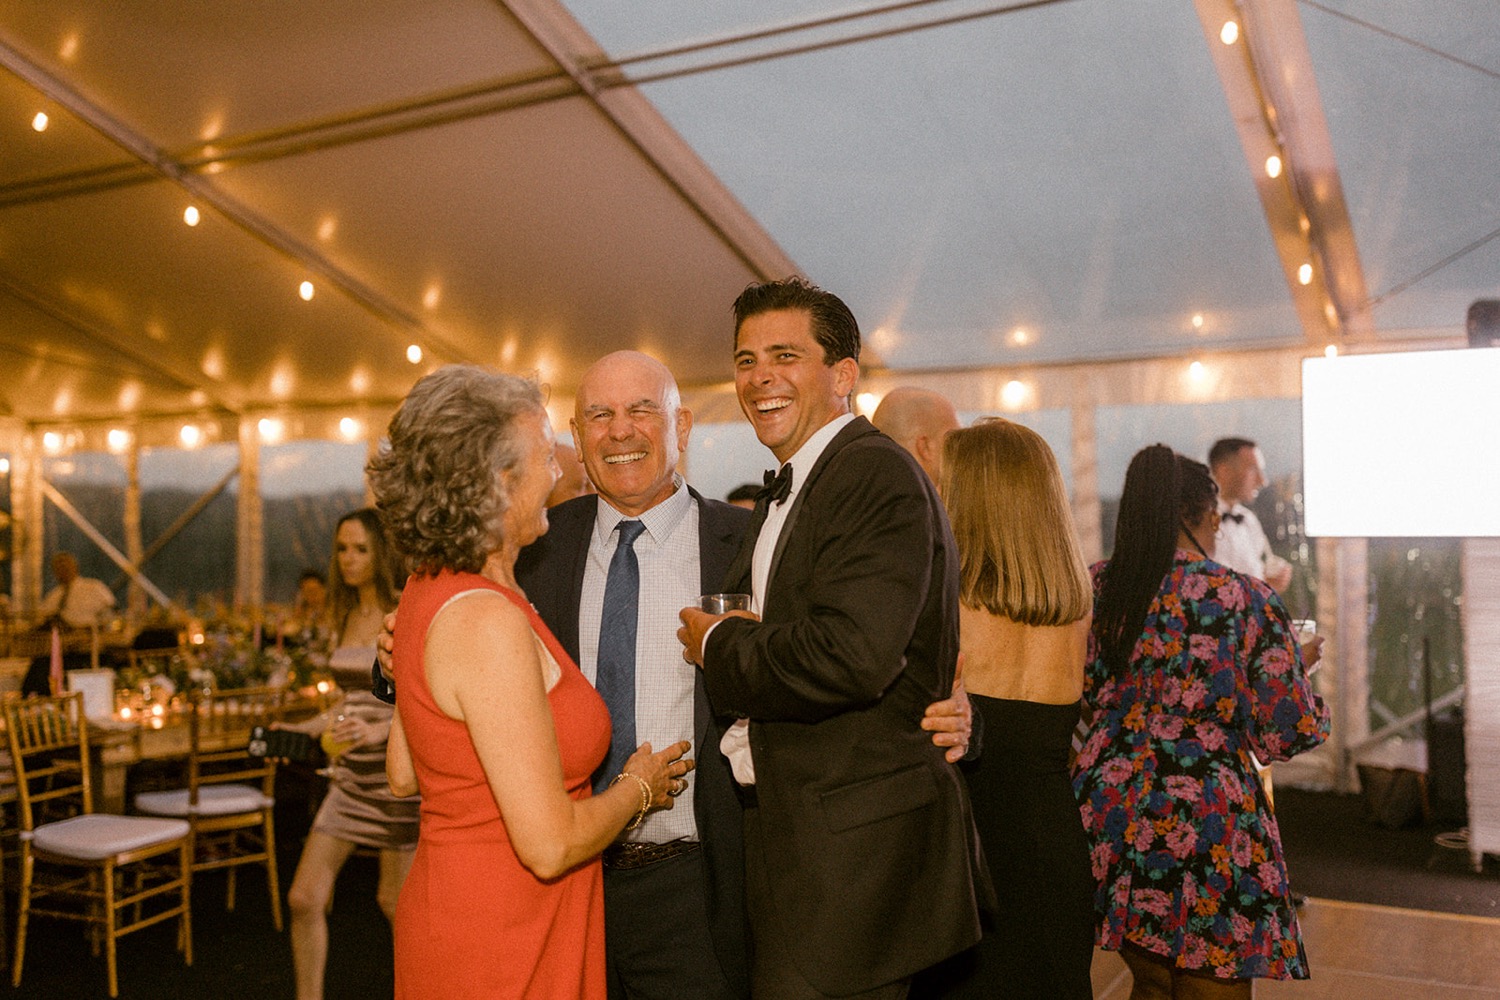 group laughing at wedding reception